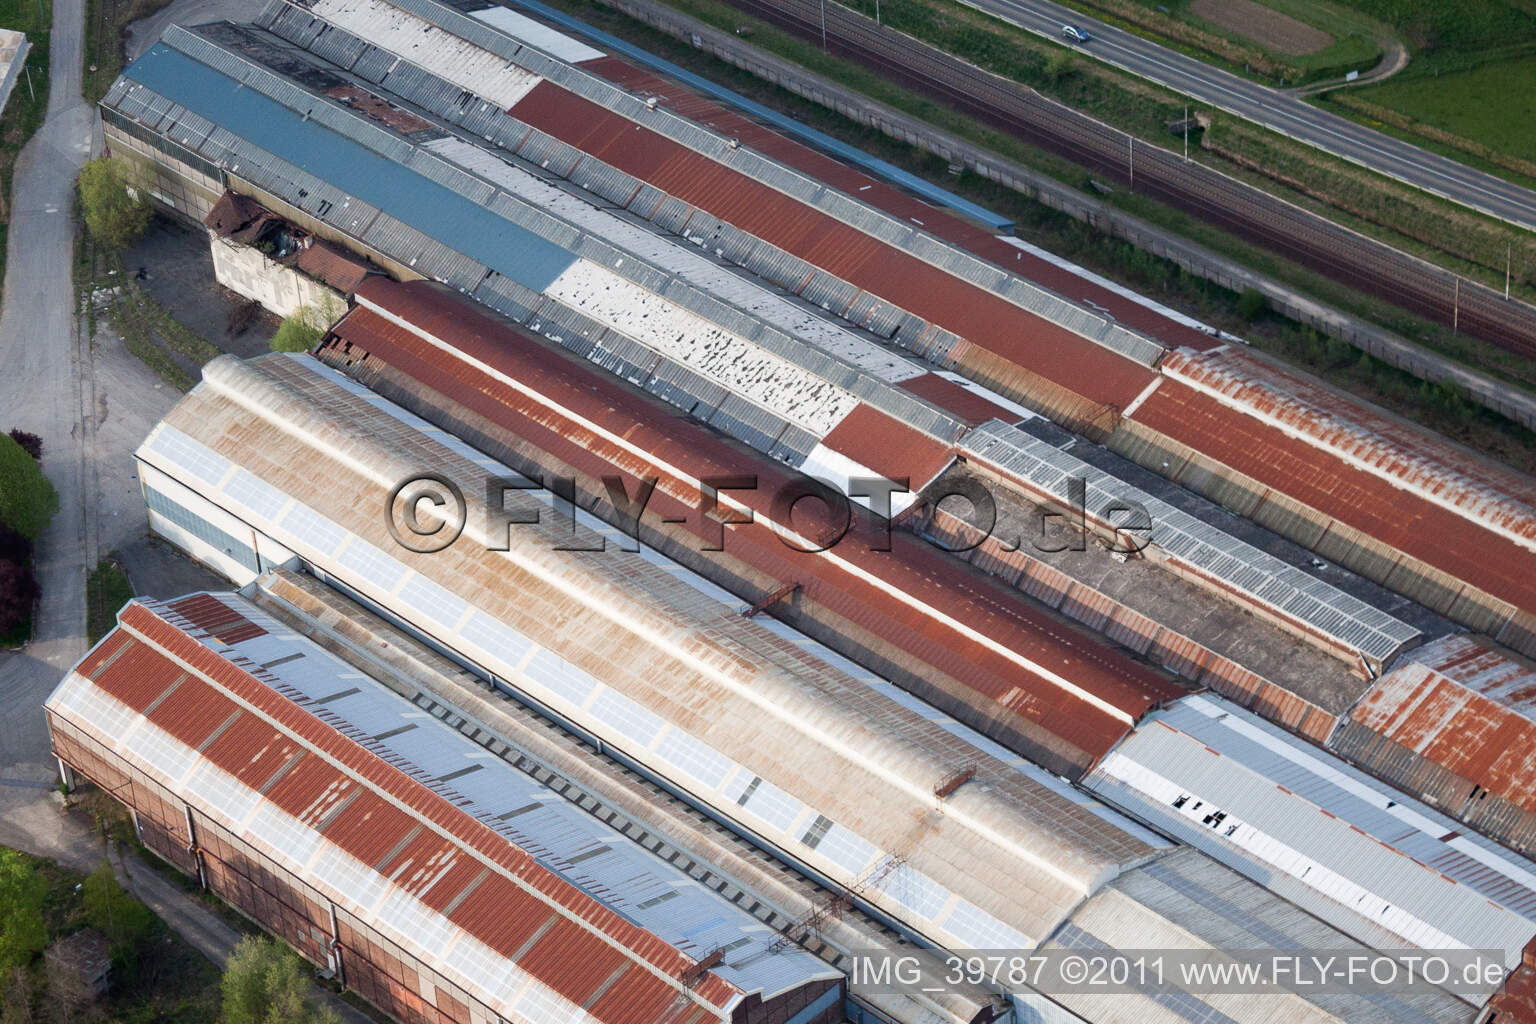 Railway depot and repair shop for maintenance and repair of trains in Blagny in Alsace-Champagne-Ardenne-Lorraine, France